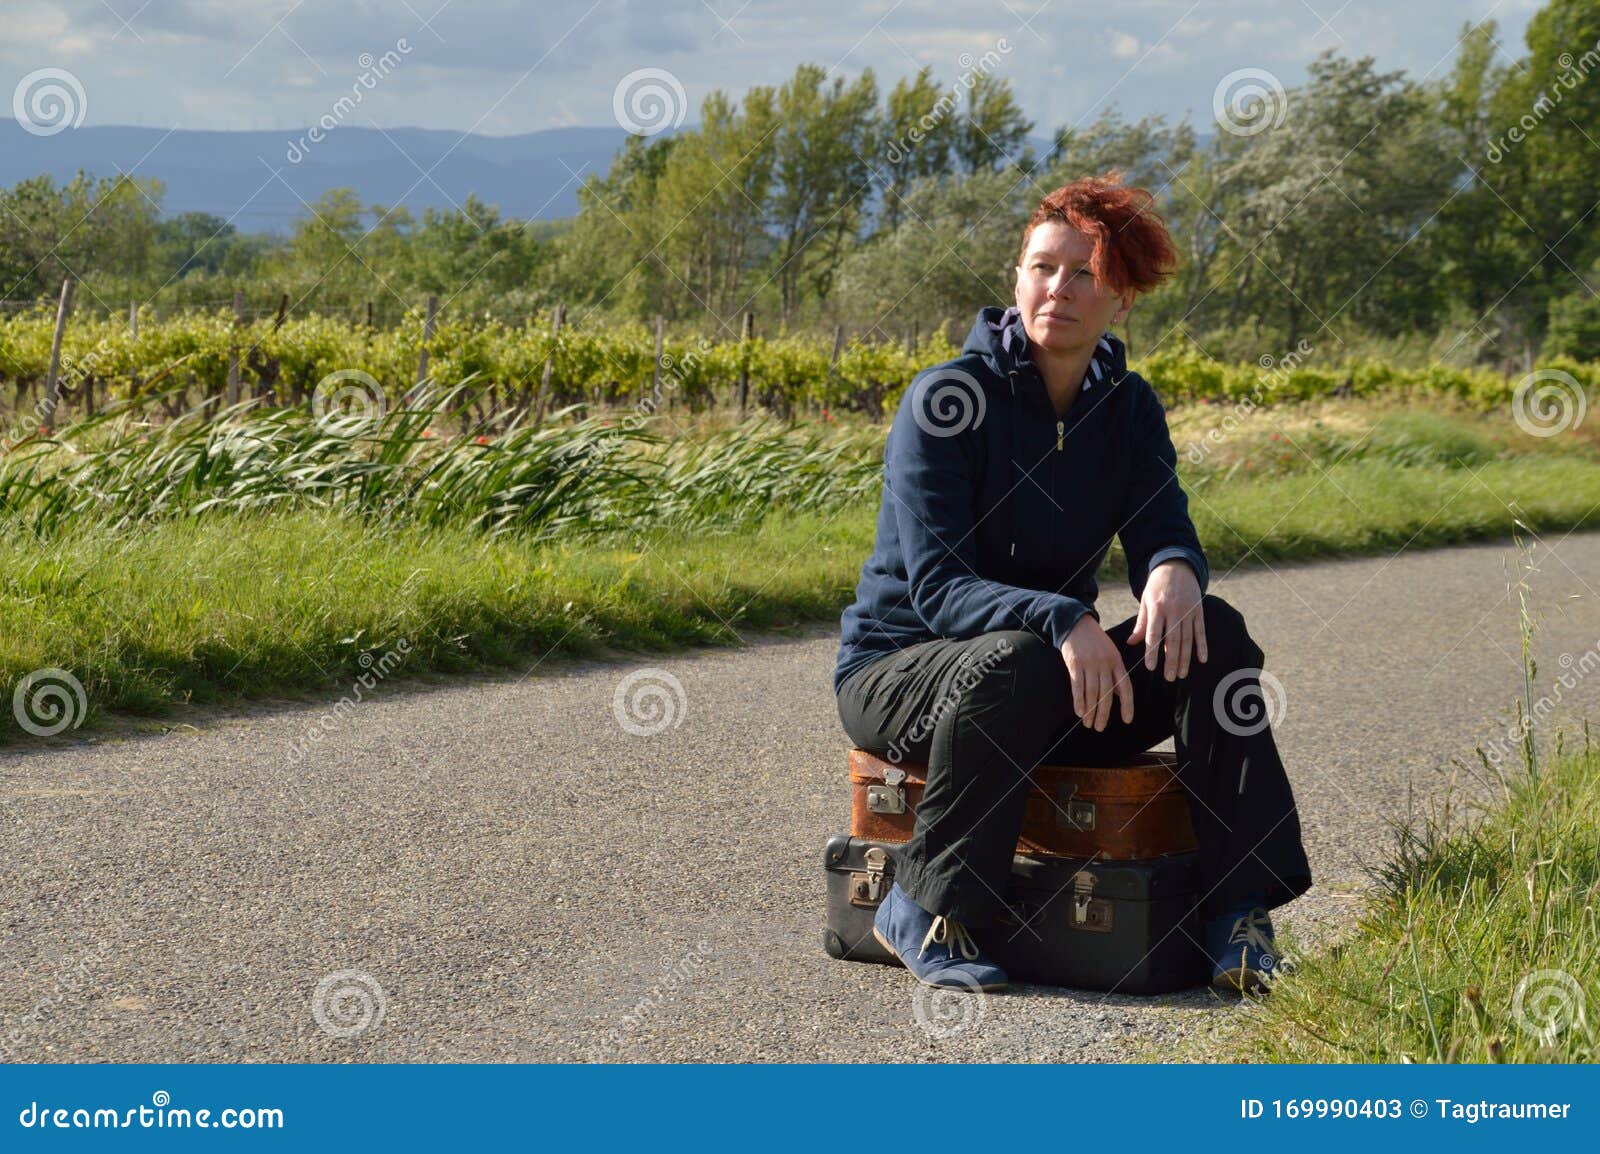 selfconfident red-haired woman on vacation